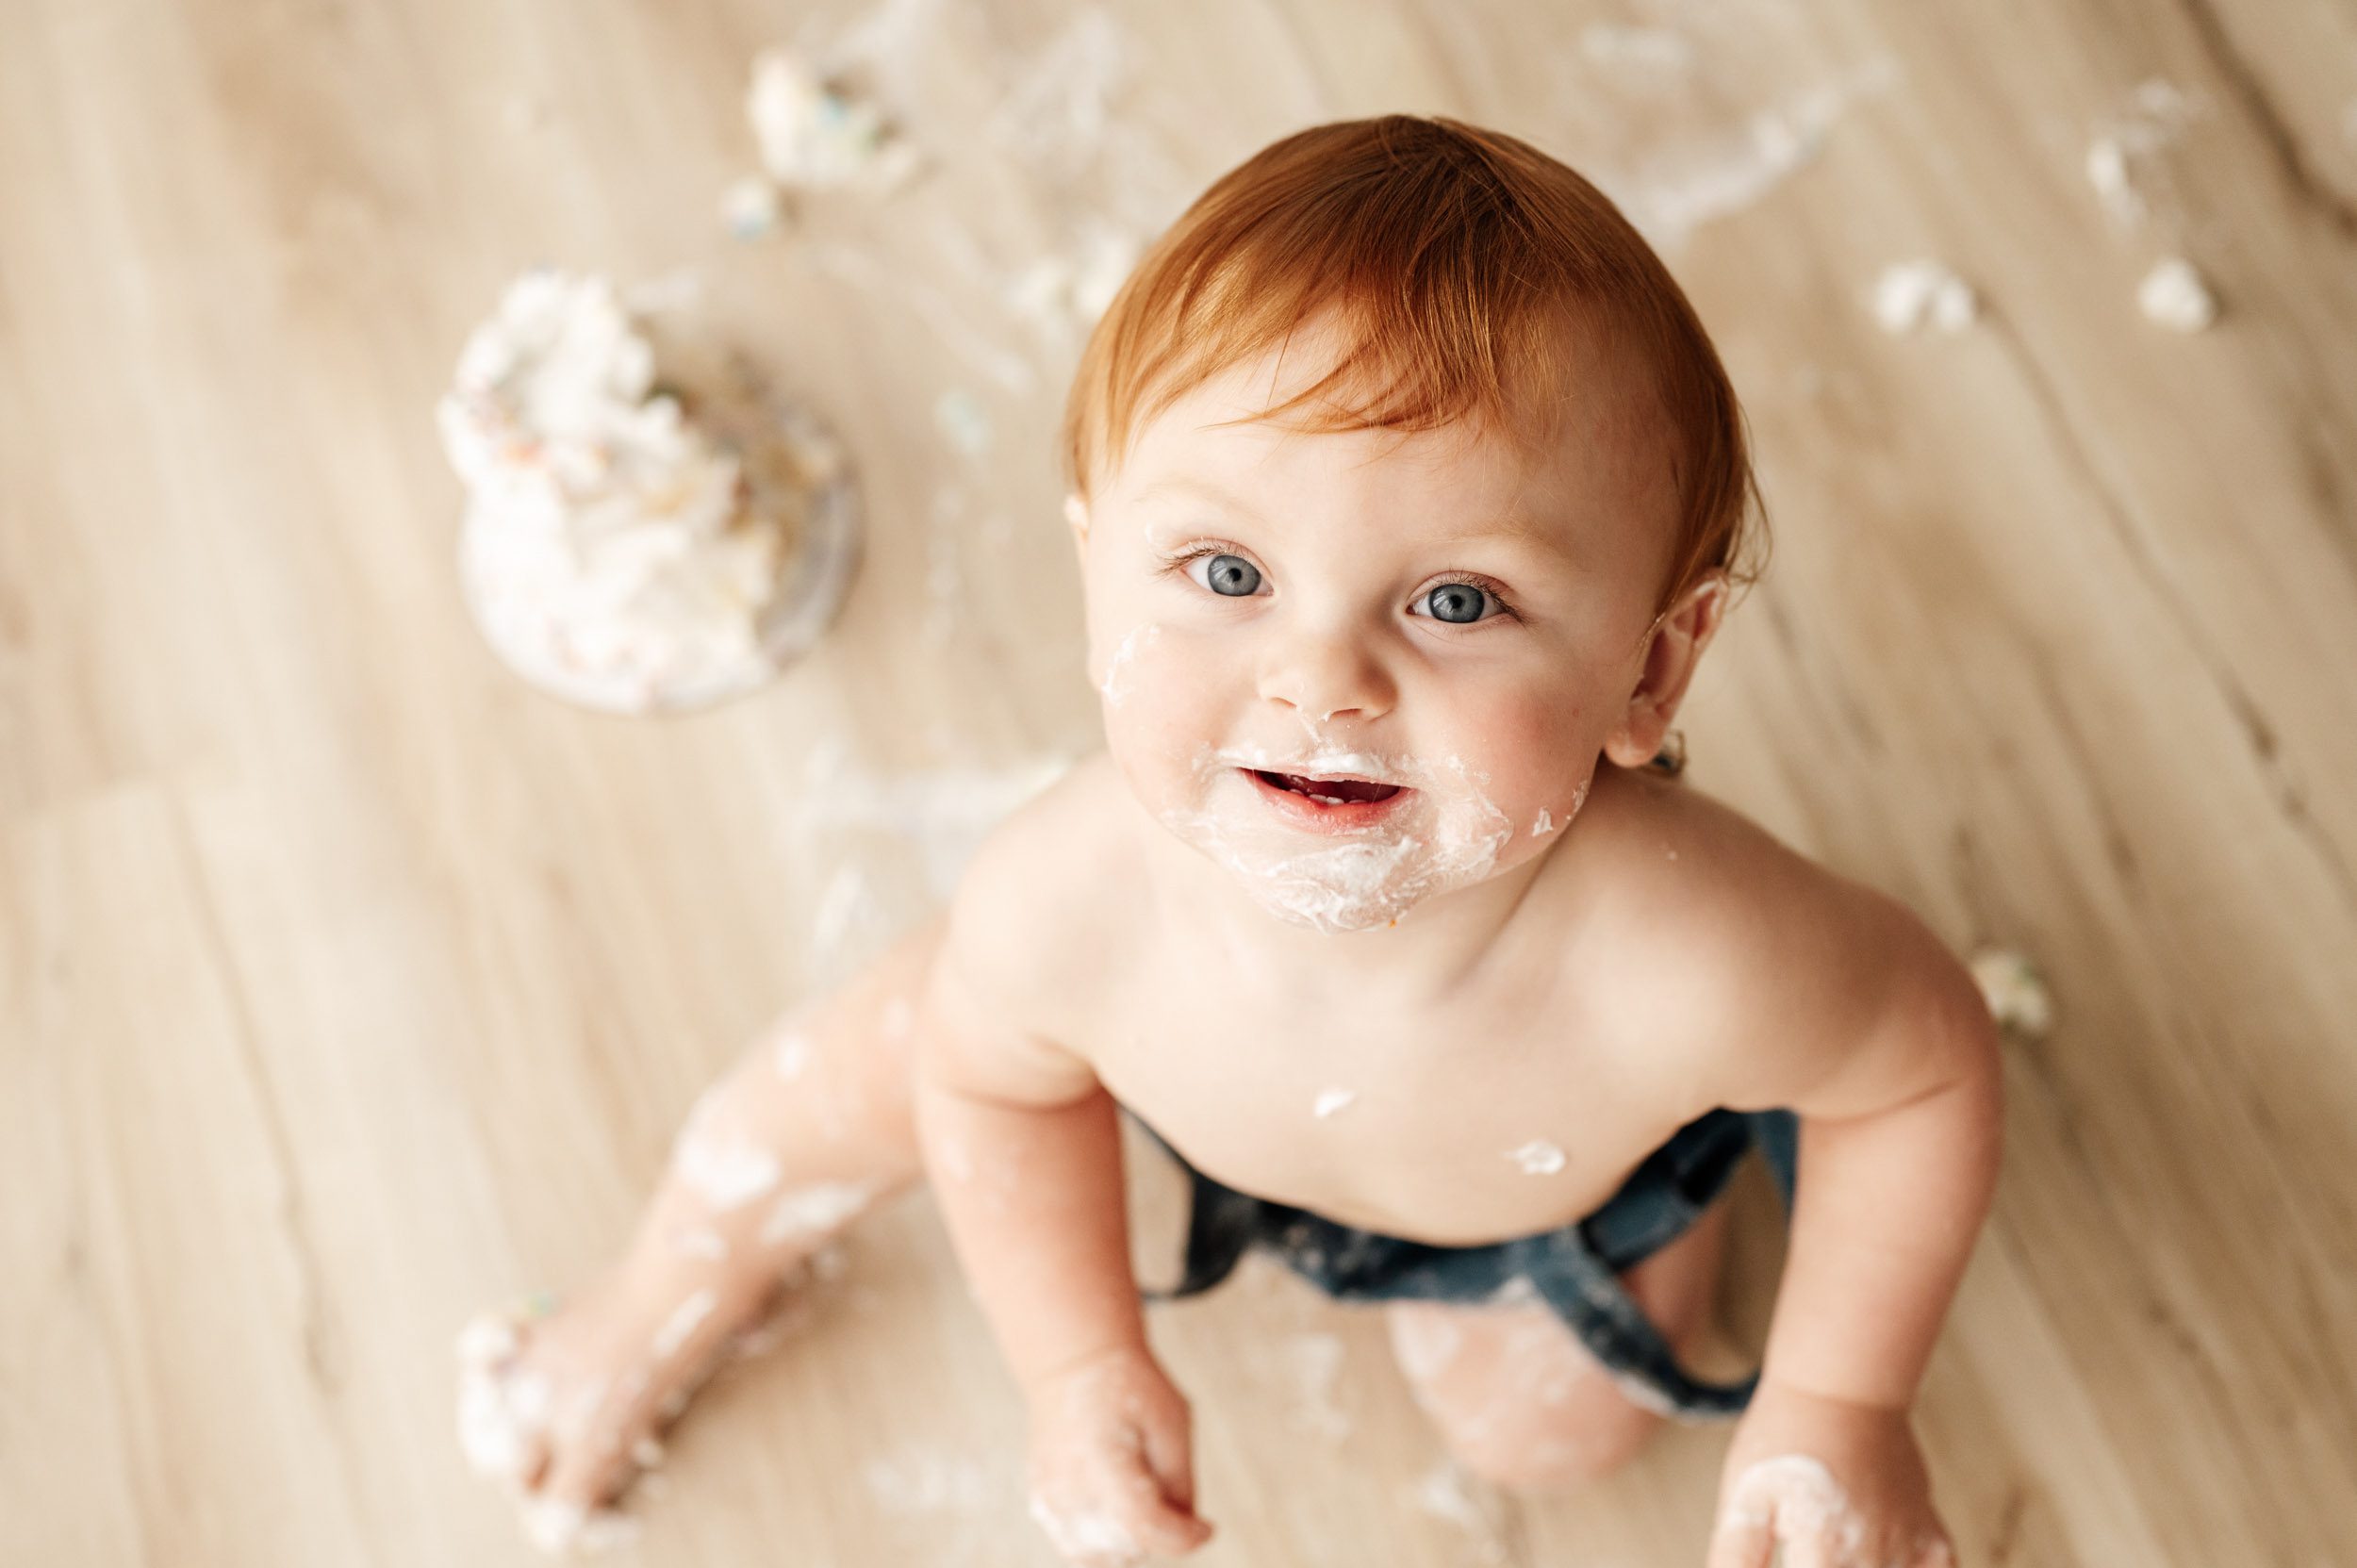 a picture of a young boy taken from above with cake all over his arms and face and hands and feet and the floor around him as he looks up at the camera with a big grin on his face during a 1st birthday cake smash photoshoot